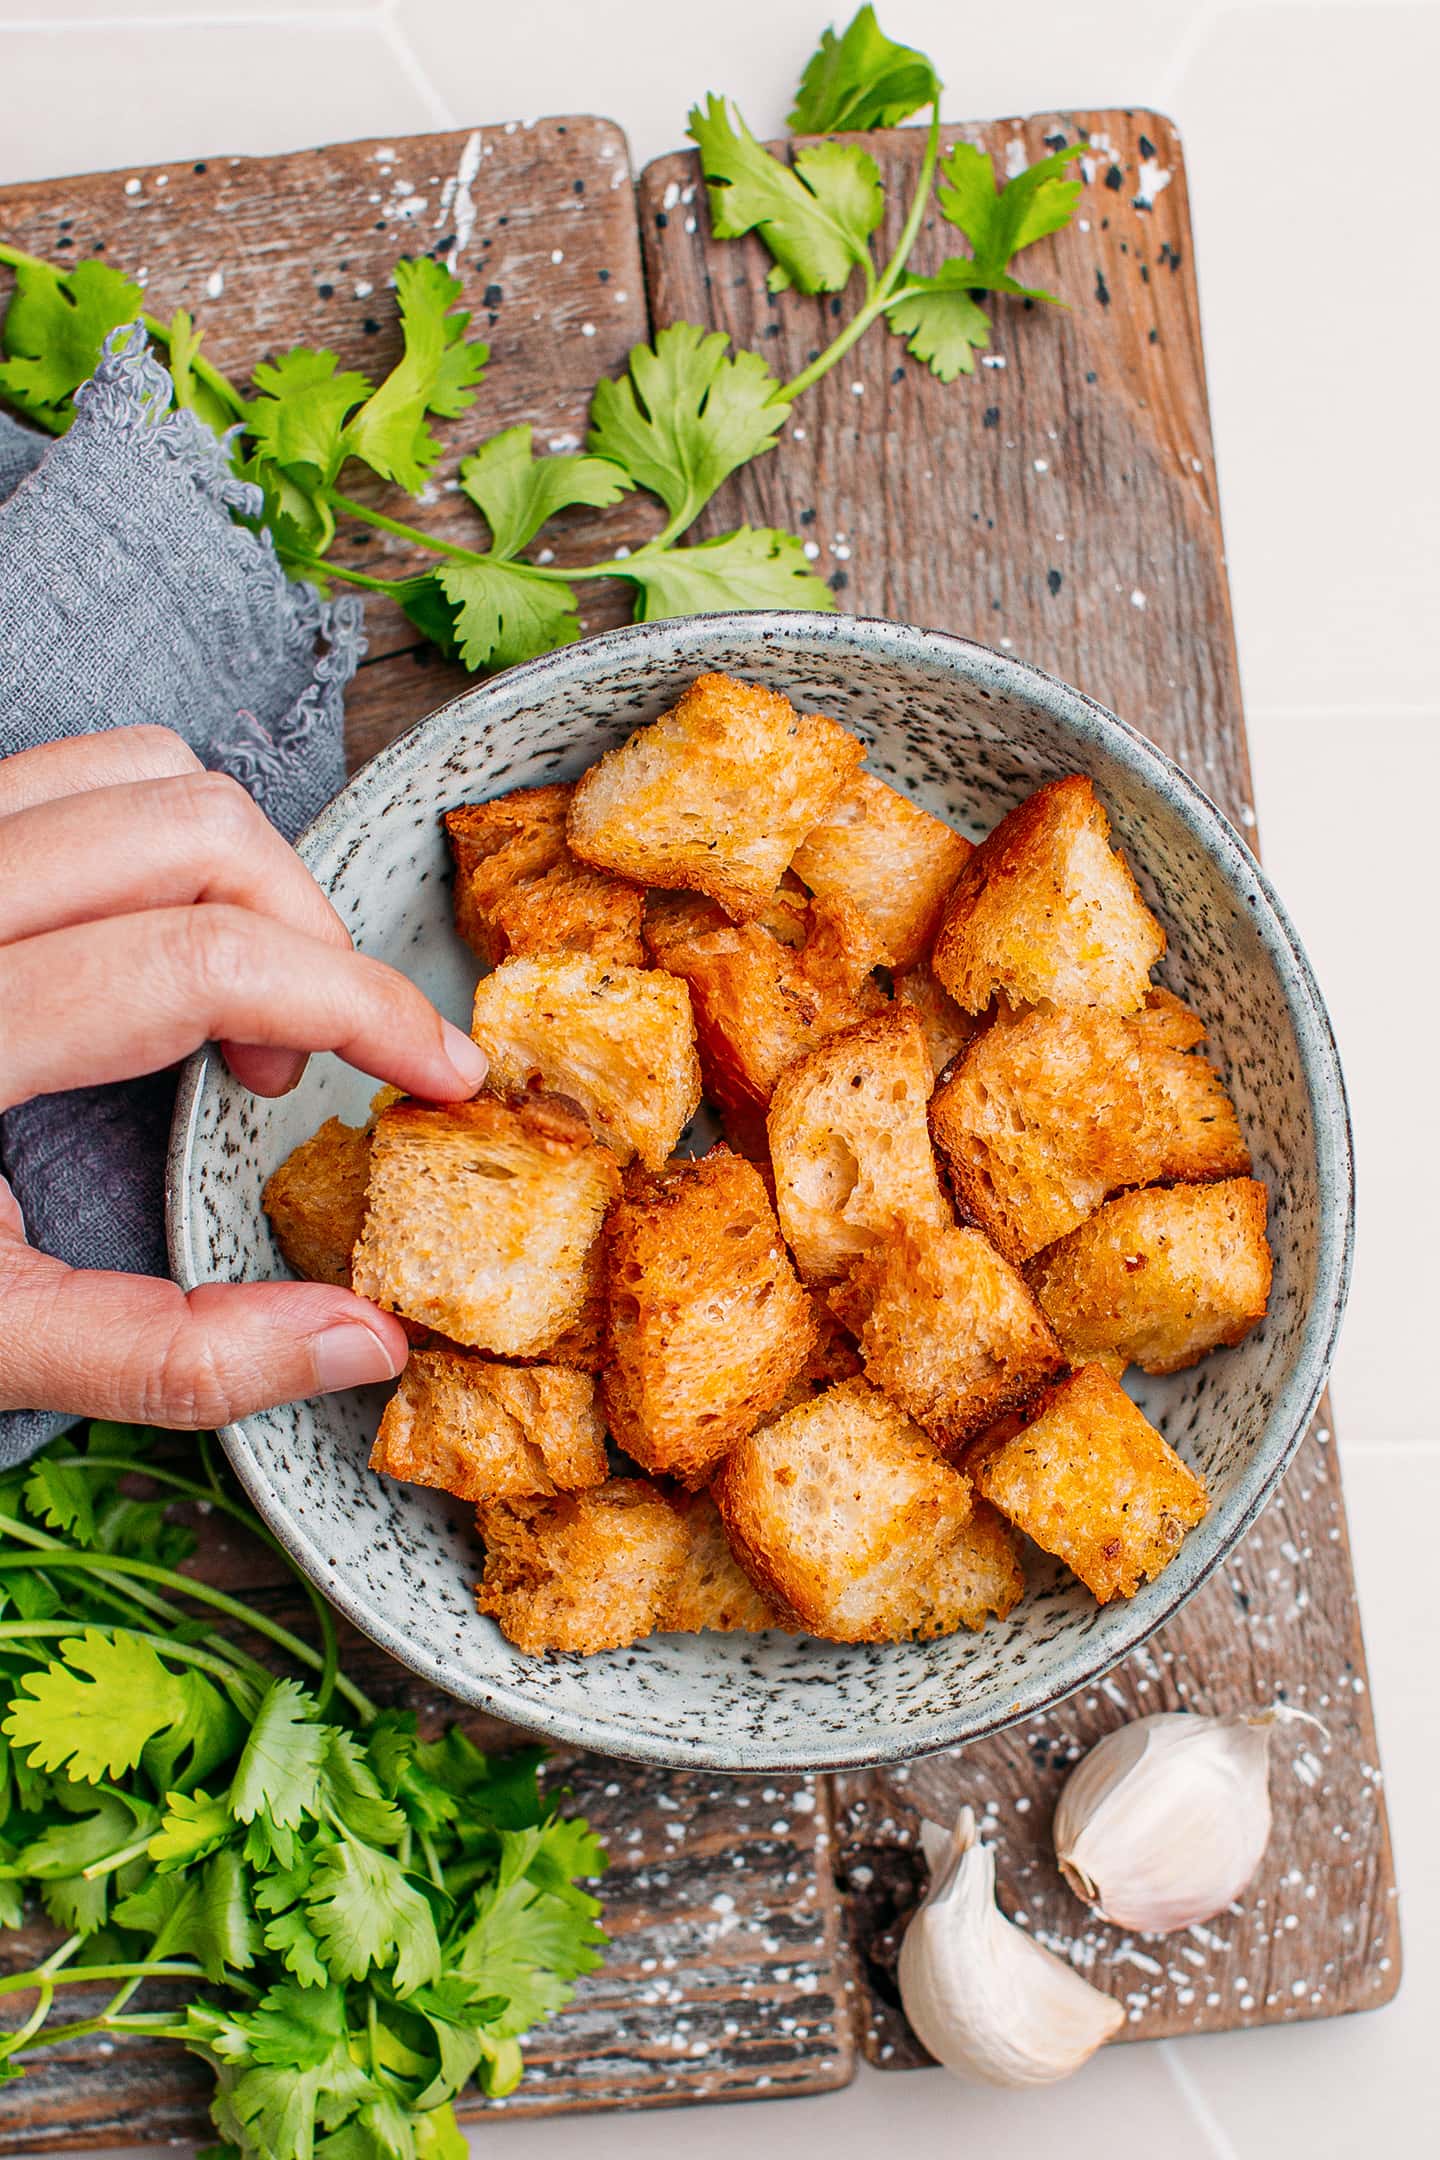 Golden brown croutons in a small bowl.